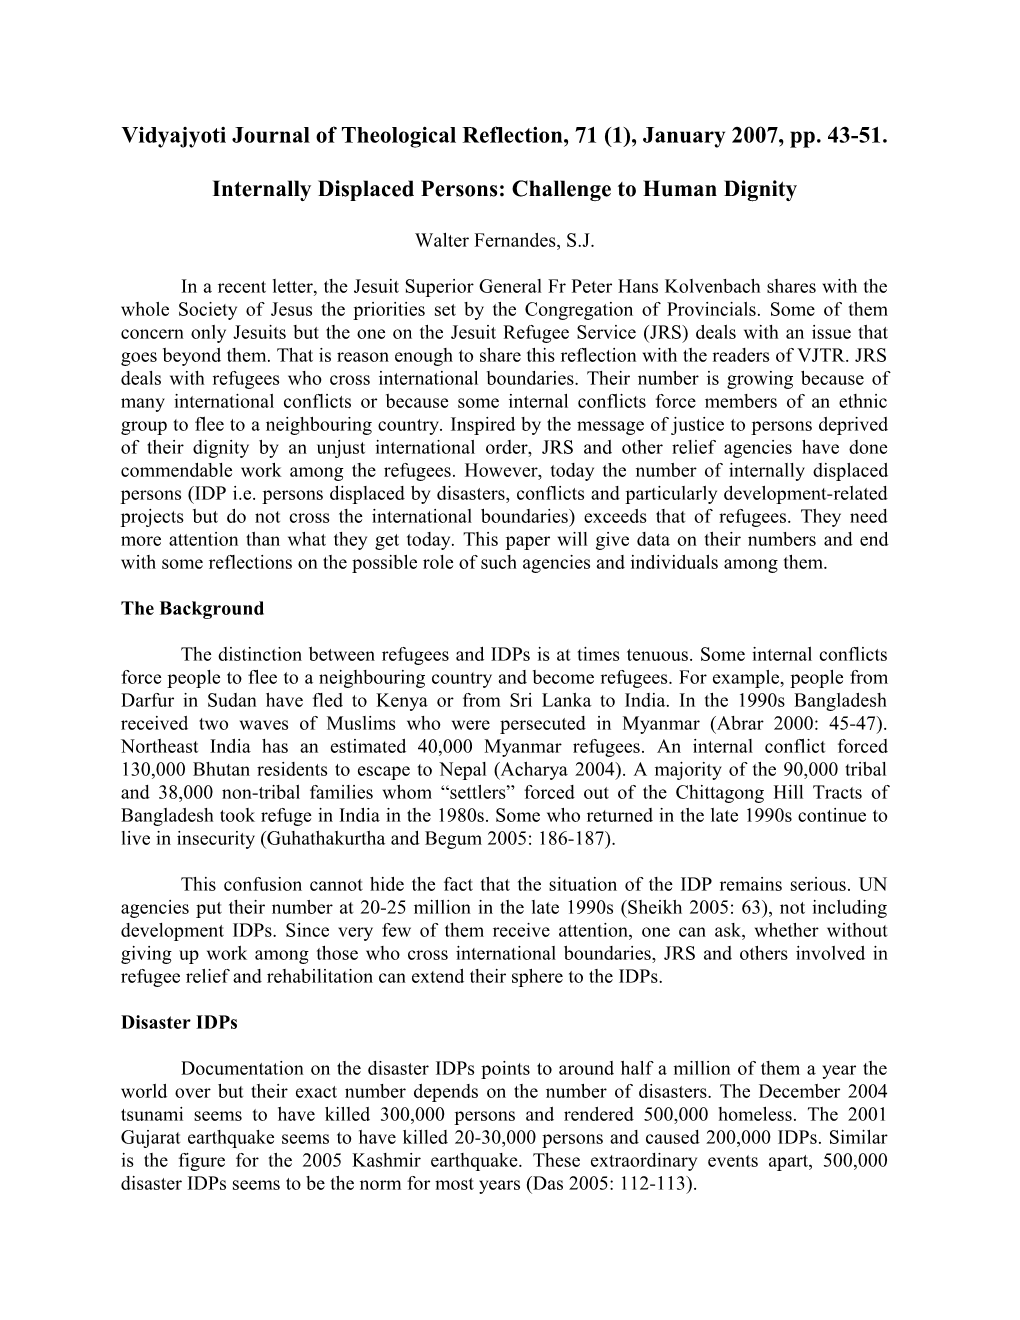 Internally Displaced Persons: Challenge to Human Dignity